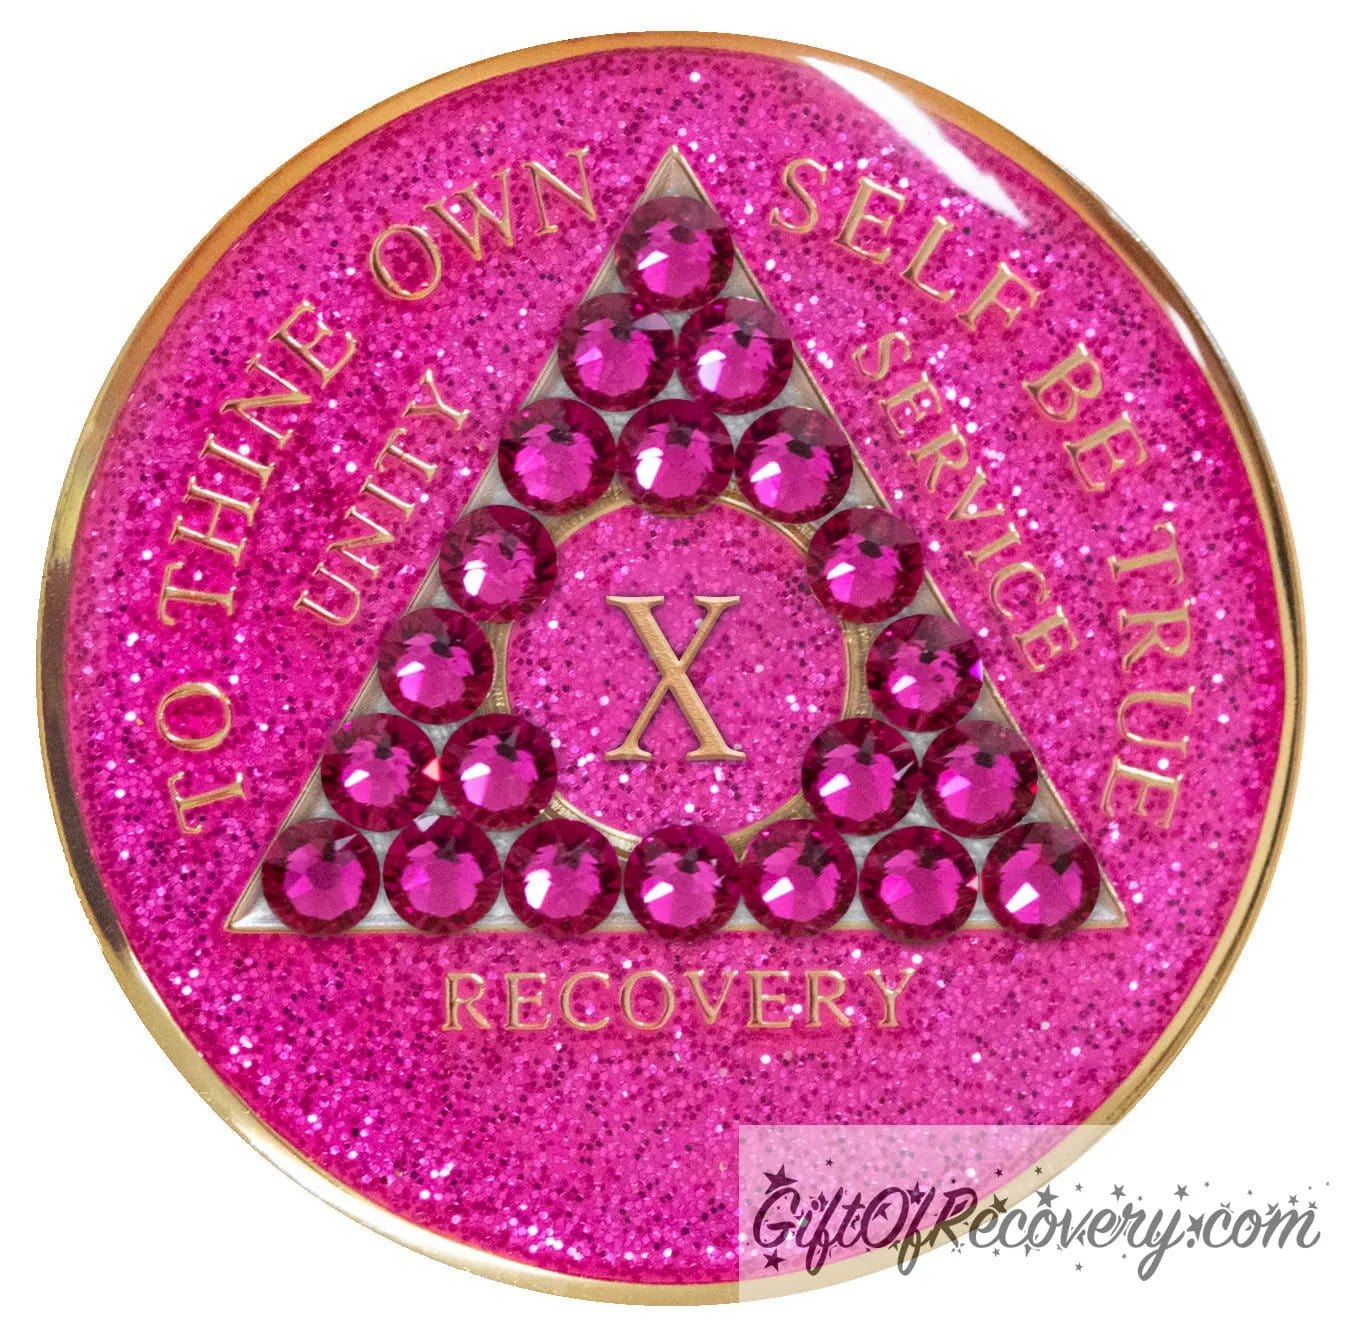 10 year Princess Pink Glitter AA medallion with 21 genuine fuchsia crystals in the shape of a triangle in the center of the recovery medallion, for your favorite sober princess, and to thine own self be true, unity, service, recovery, the roman numeral in the middle, and the outer rim, embossed in 14k plated brass, the aa medallion is sealed in resin for a shiny finish.